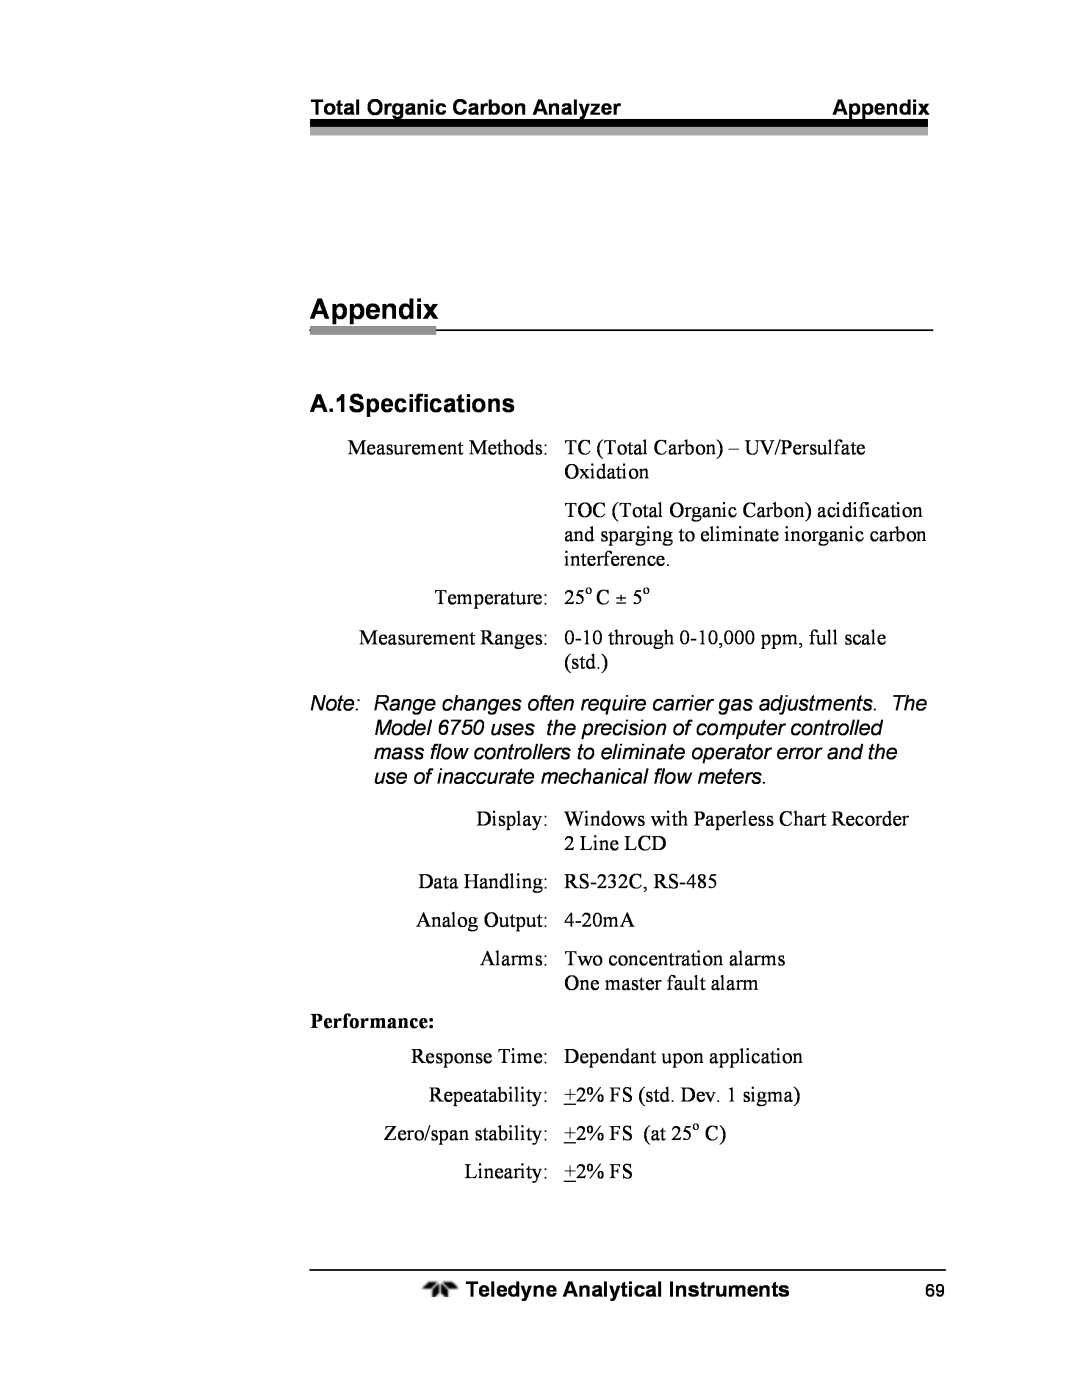 Teledyne 6750 operating instructions Appendix, A.1Specifications, Performance 